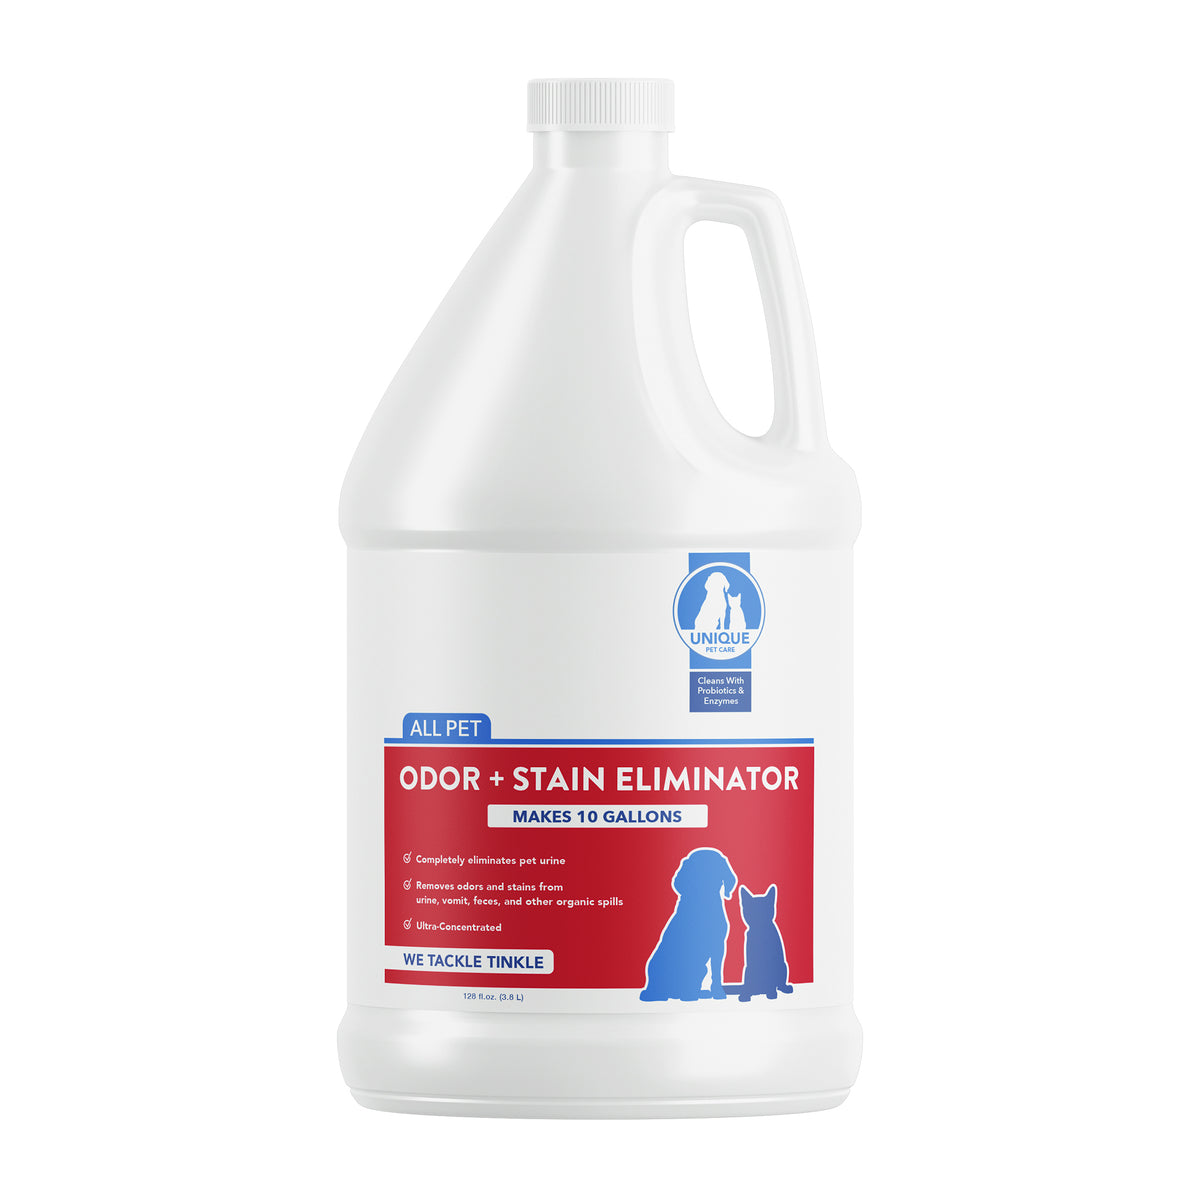 Unique Pet Odor and Stain Eliminator 128 oz. Gallon Formulated with Trust - Stain odor and urine remover - works fast to remove the worst stains and odors on all surfaces